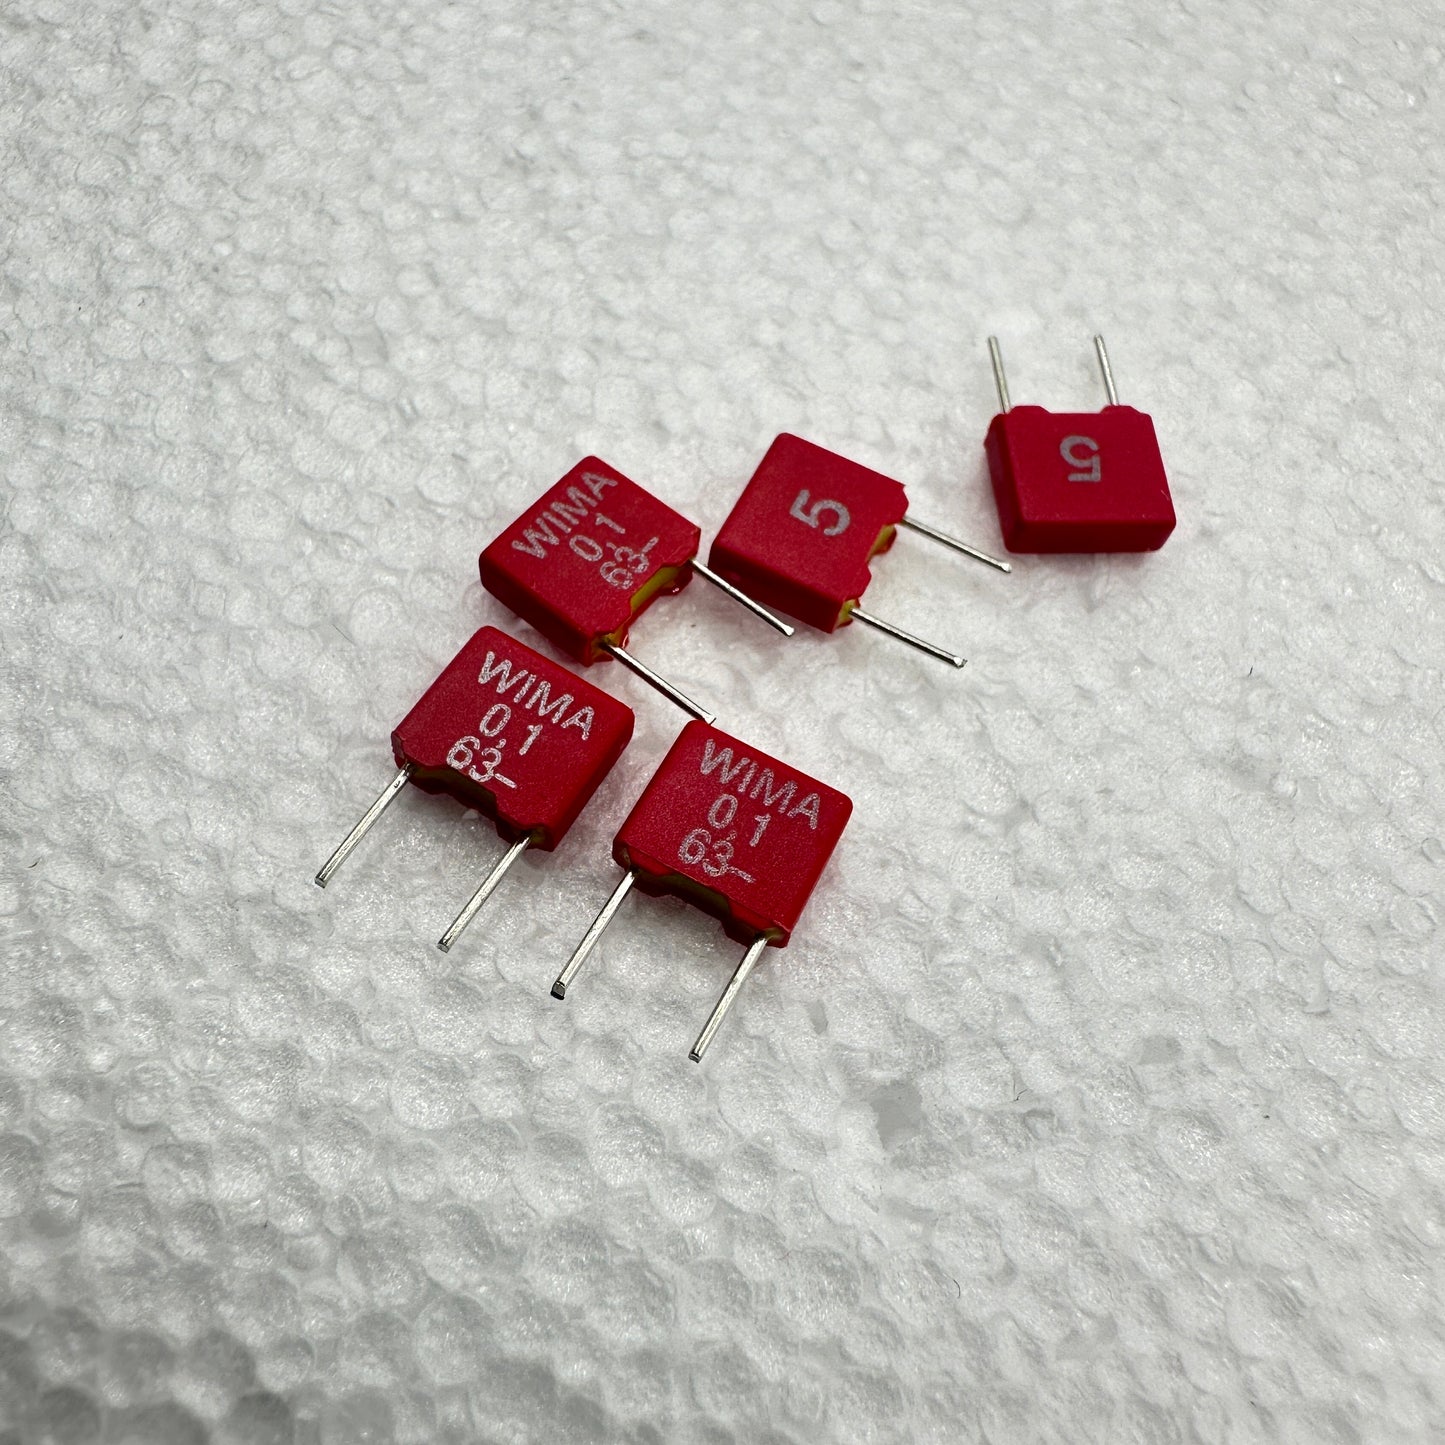 5 PACK WIMA MKS2 .1UF 63V 5% Metallized Polyester Capacitors 100nf